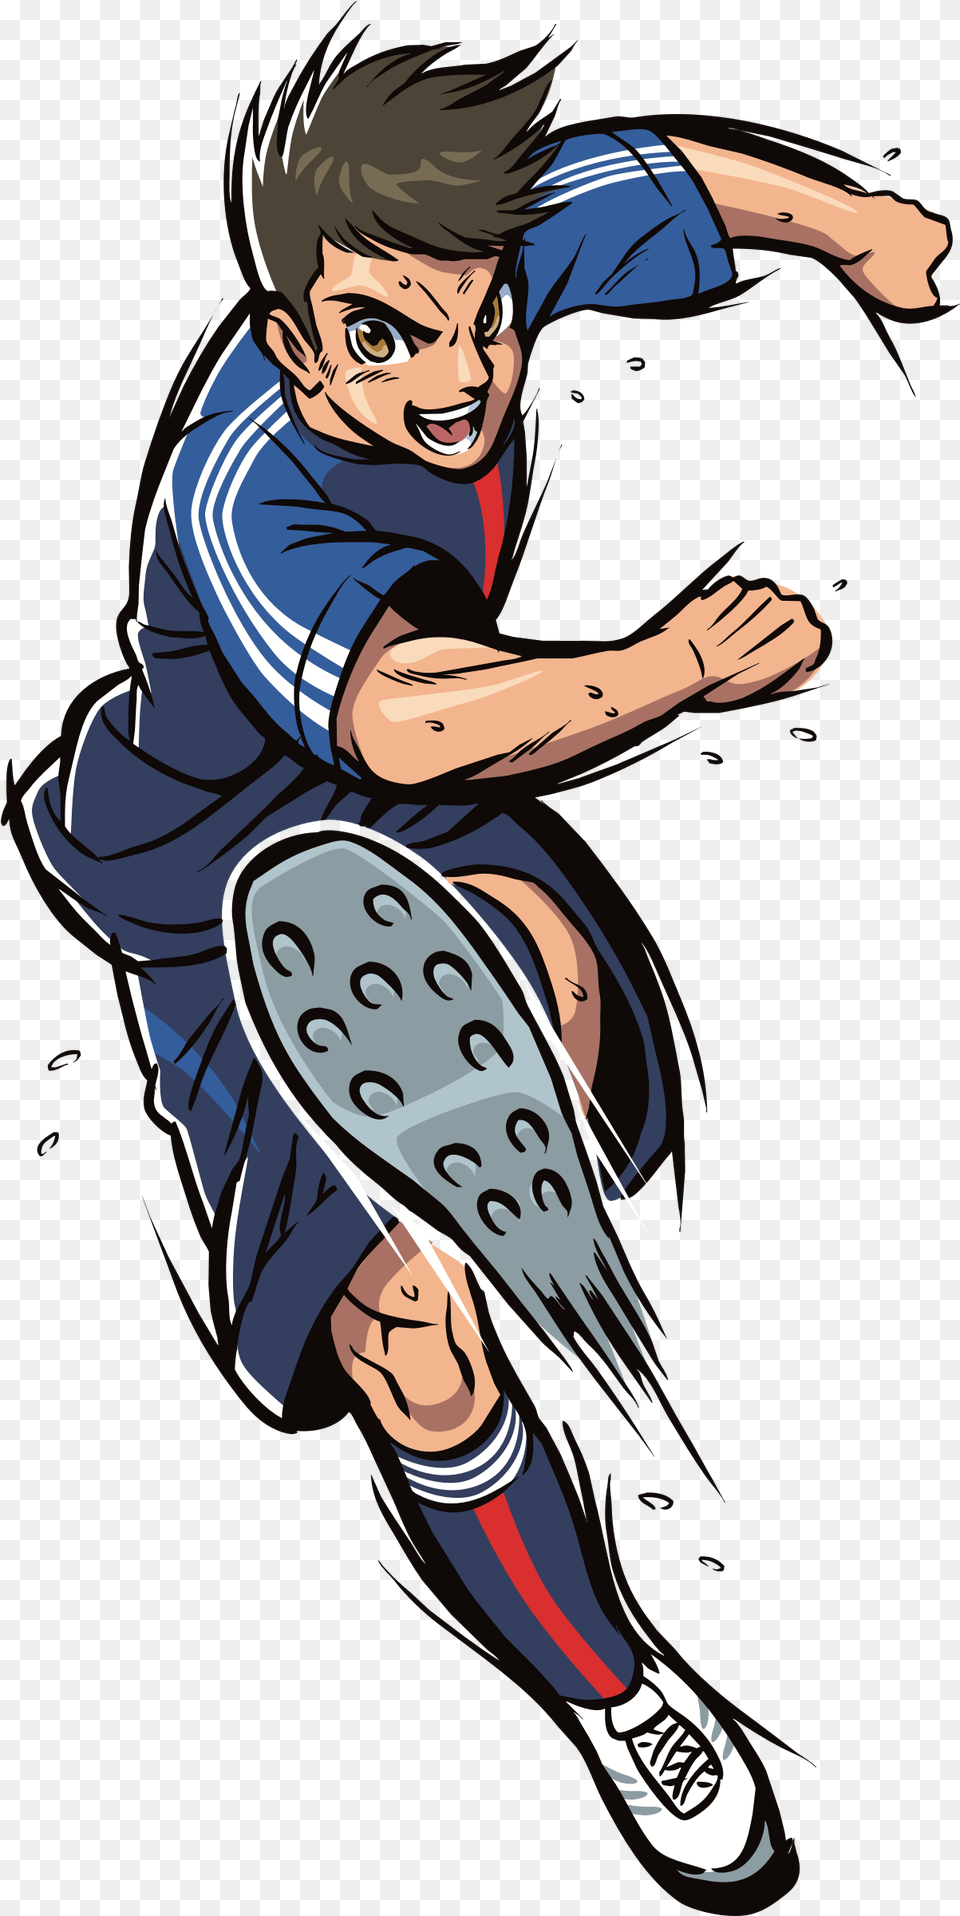 Soccer Clipart Character Soccer Player Cartoon Cartoon Character Playing Football, Book, Comics, Publication, Person Free Transparent Png